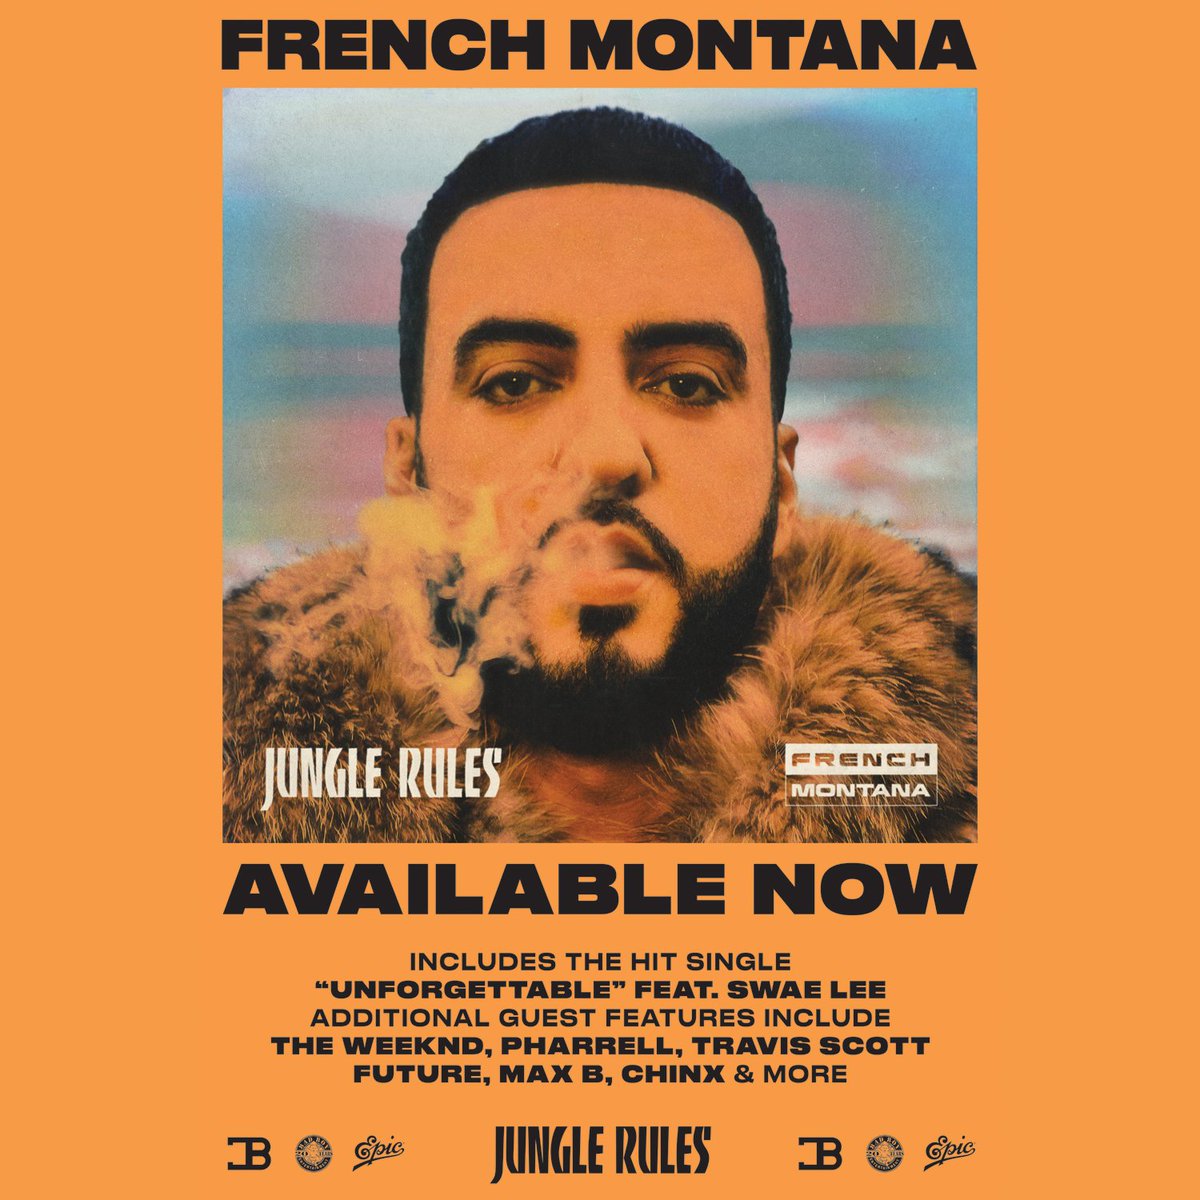 French montana unforgettable. French Montana Jungle Rules. Unforgettable French Montana. French Montana Jungle Rules  2017. Обложка French Montana Jungle Rules.